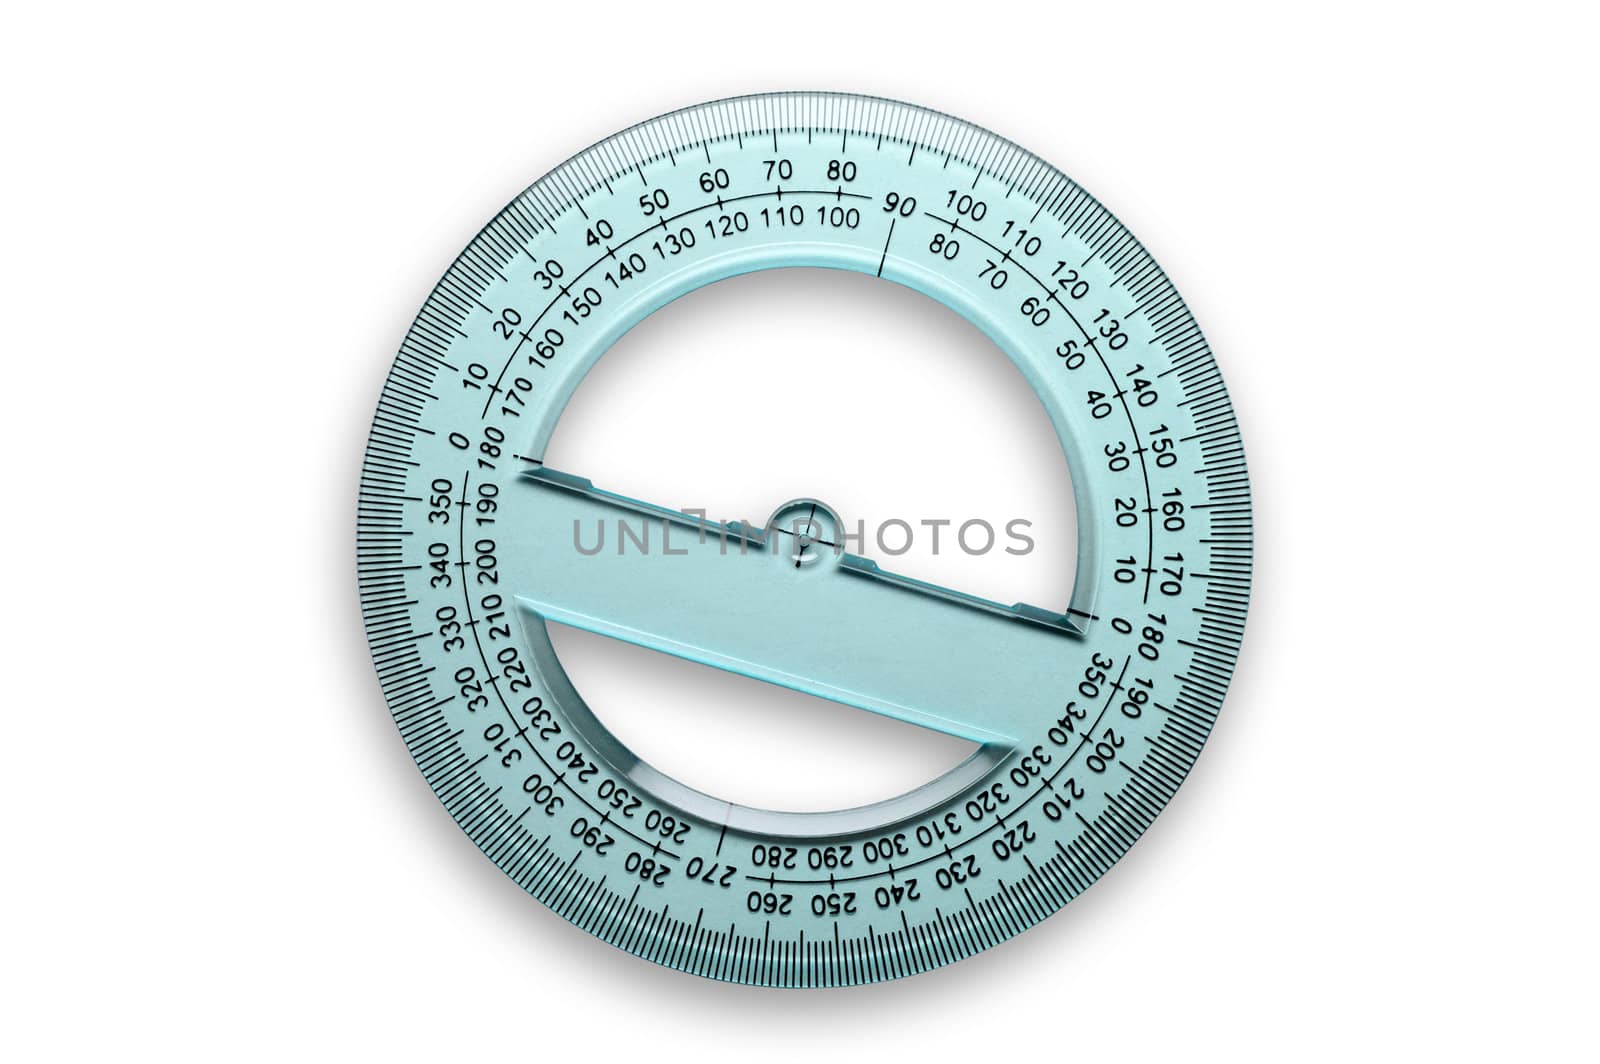 360 degrees protractor with clipping path